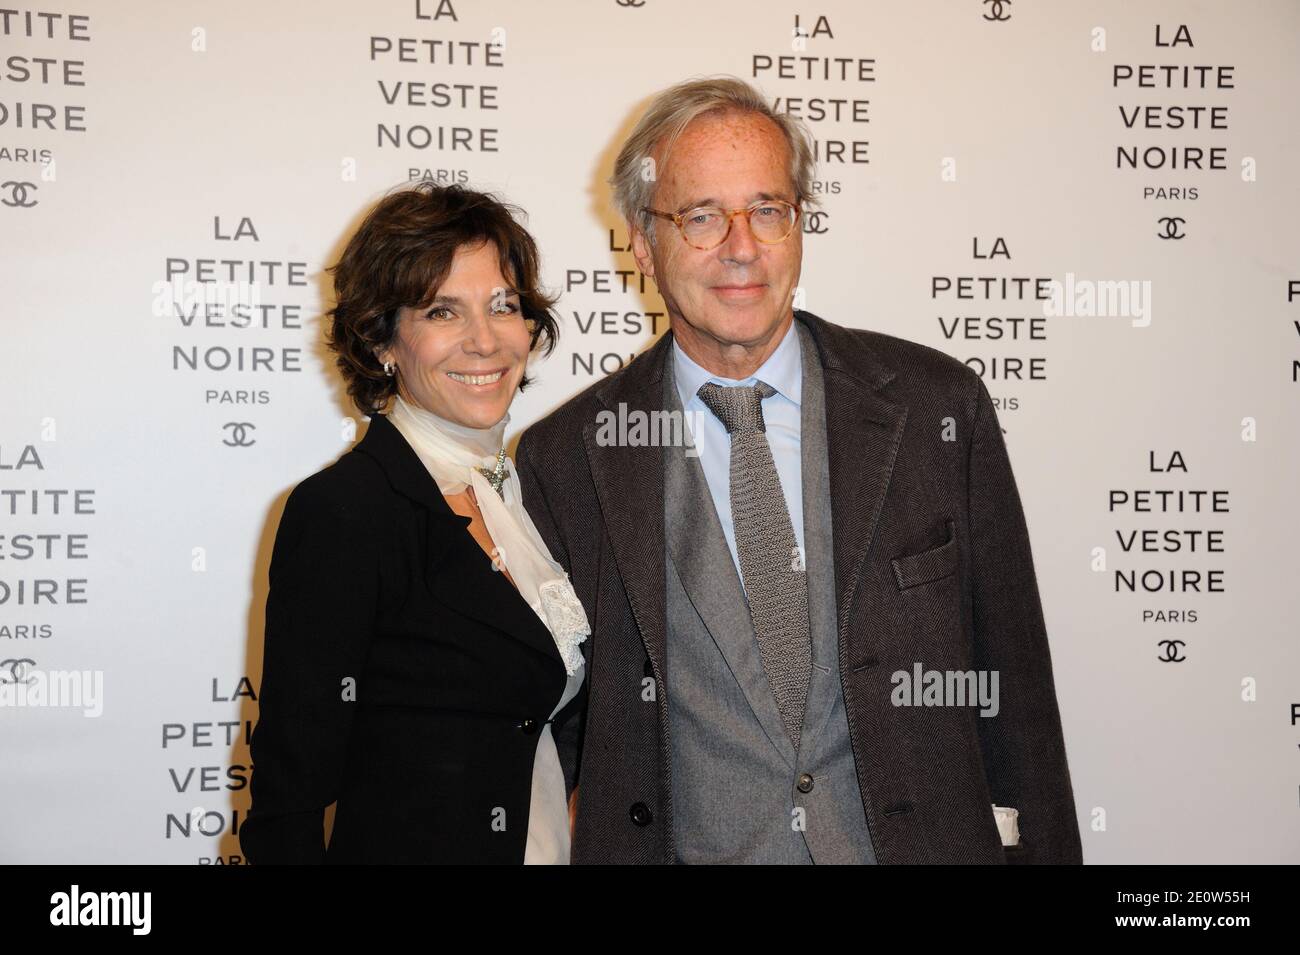 Olivier and Christine Orban attending Chanel's 'La Petite Veste Noire' (The Little Black Jacket) exhibition opening at Grand Palais in Paris, France on November 8, 2012. Photo by Alban Wyters/ABACAPRESS.COM Stock Photo